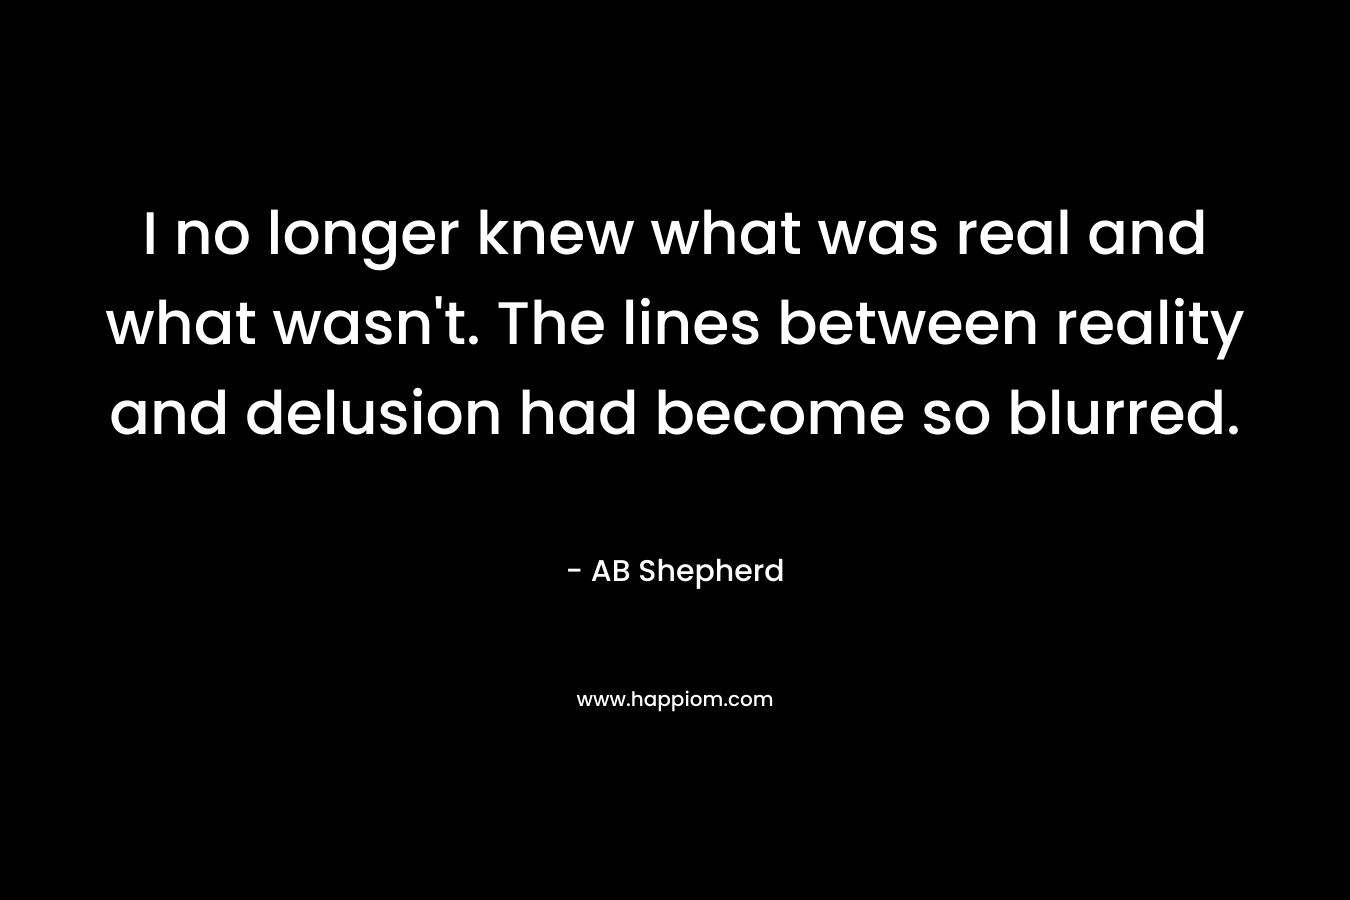 I no longer knew what was real and what wasn’t. The lines between reality and delusion had become so blurred. – AB Shepherd